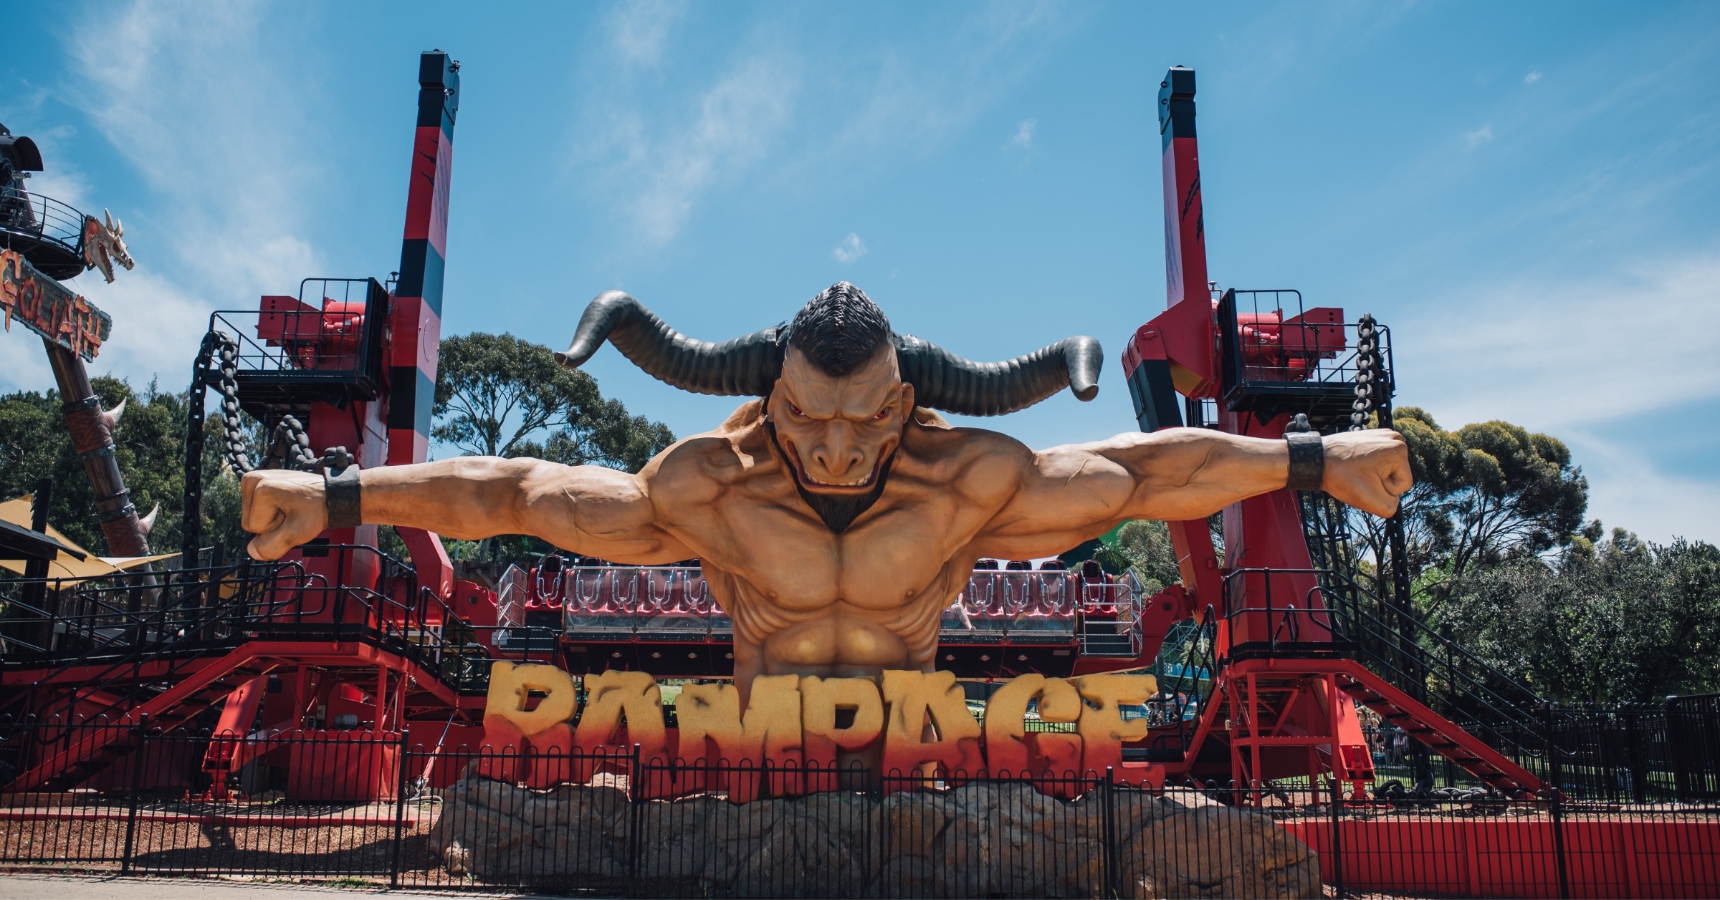 Adventure Worlds Iconic Rampage Takes Its Final Ride So Perth